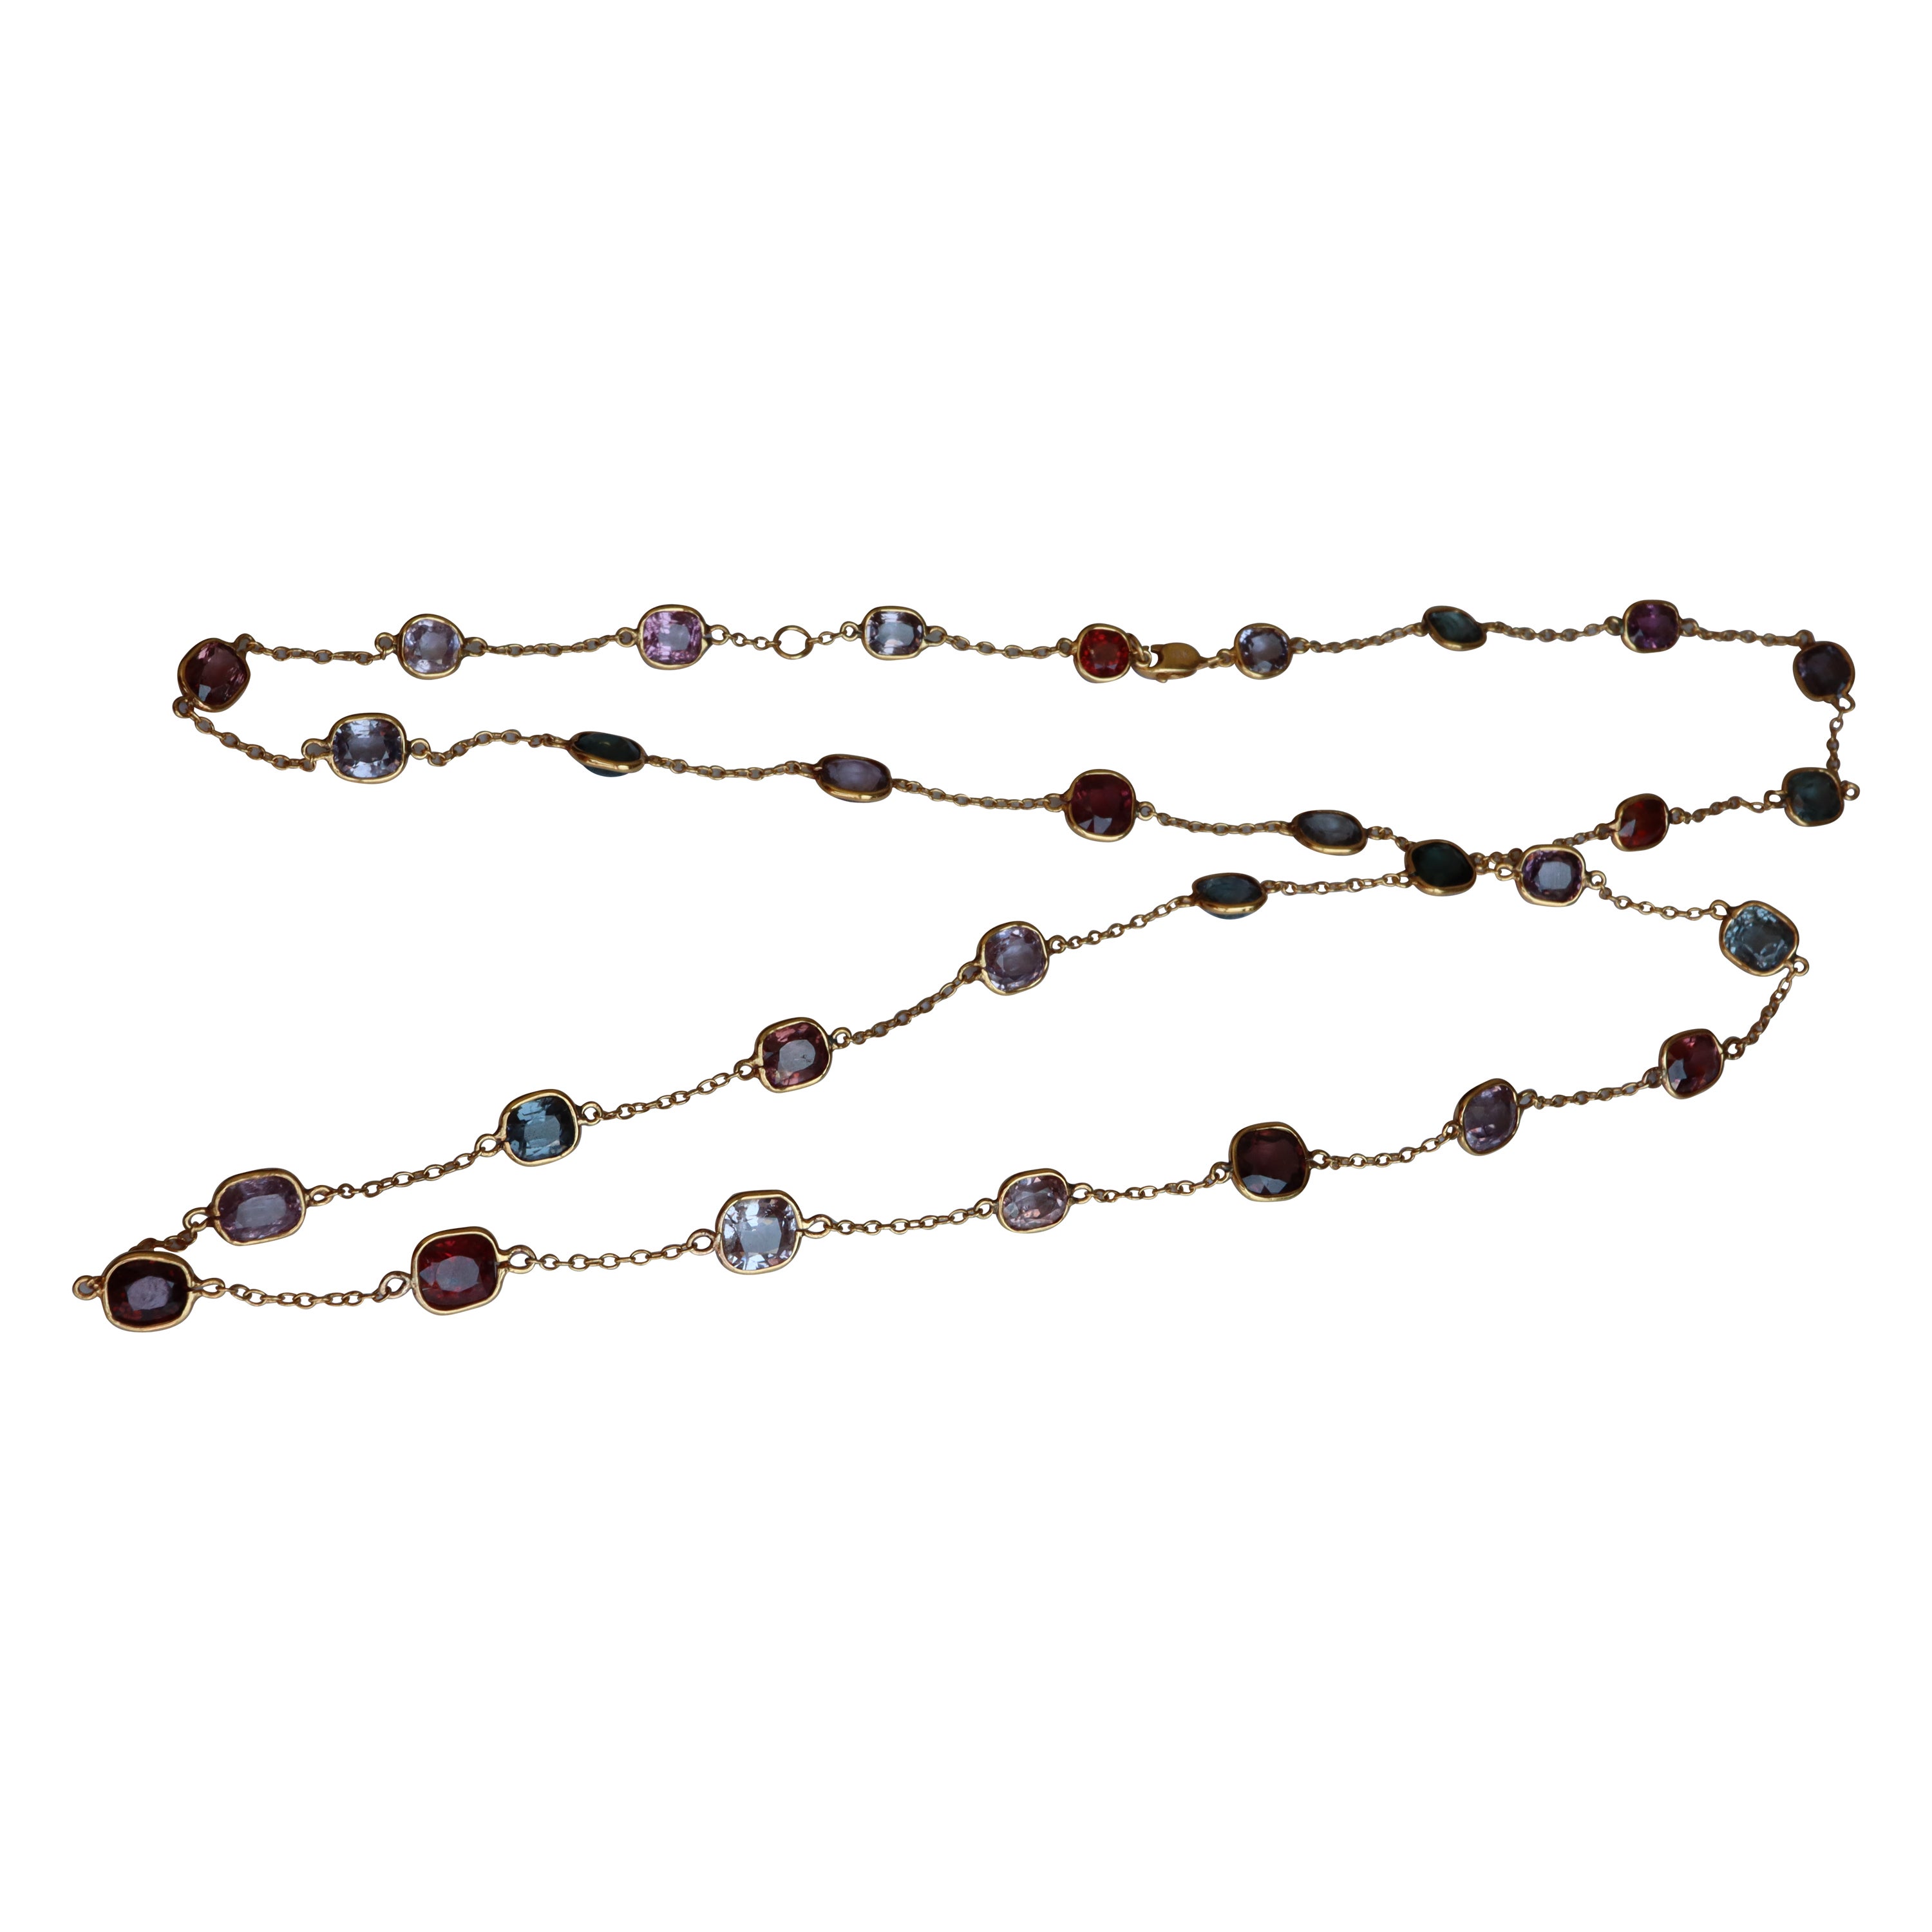 Total 41.69Ct - 31pcs of Natural Burma Spinel Yard Necklace in 18k solid gold